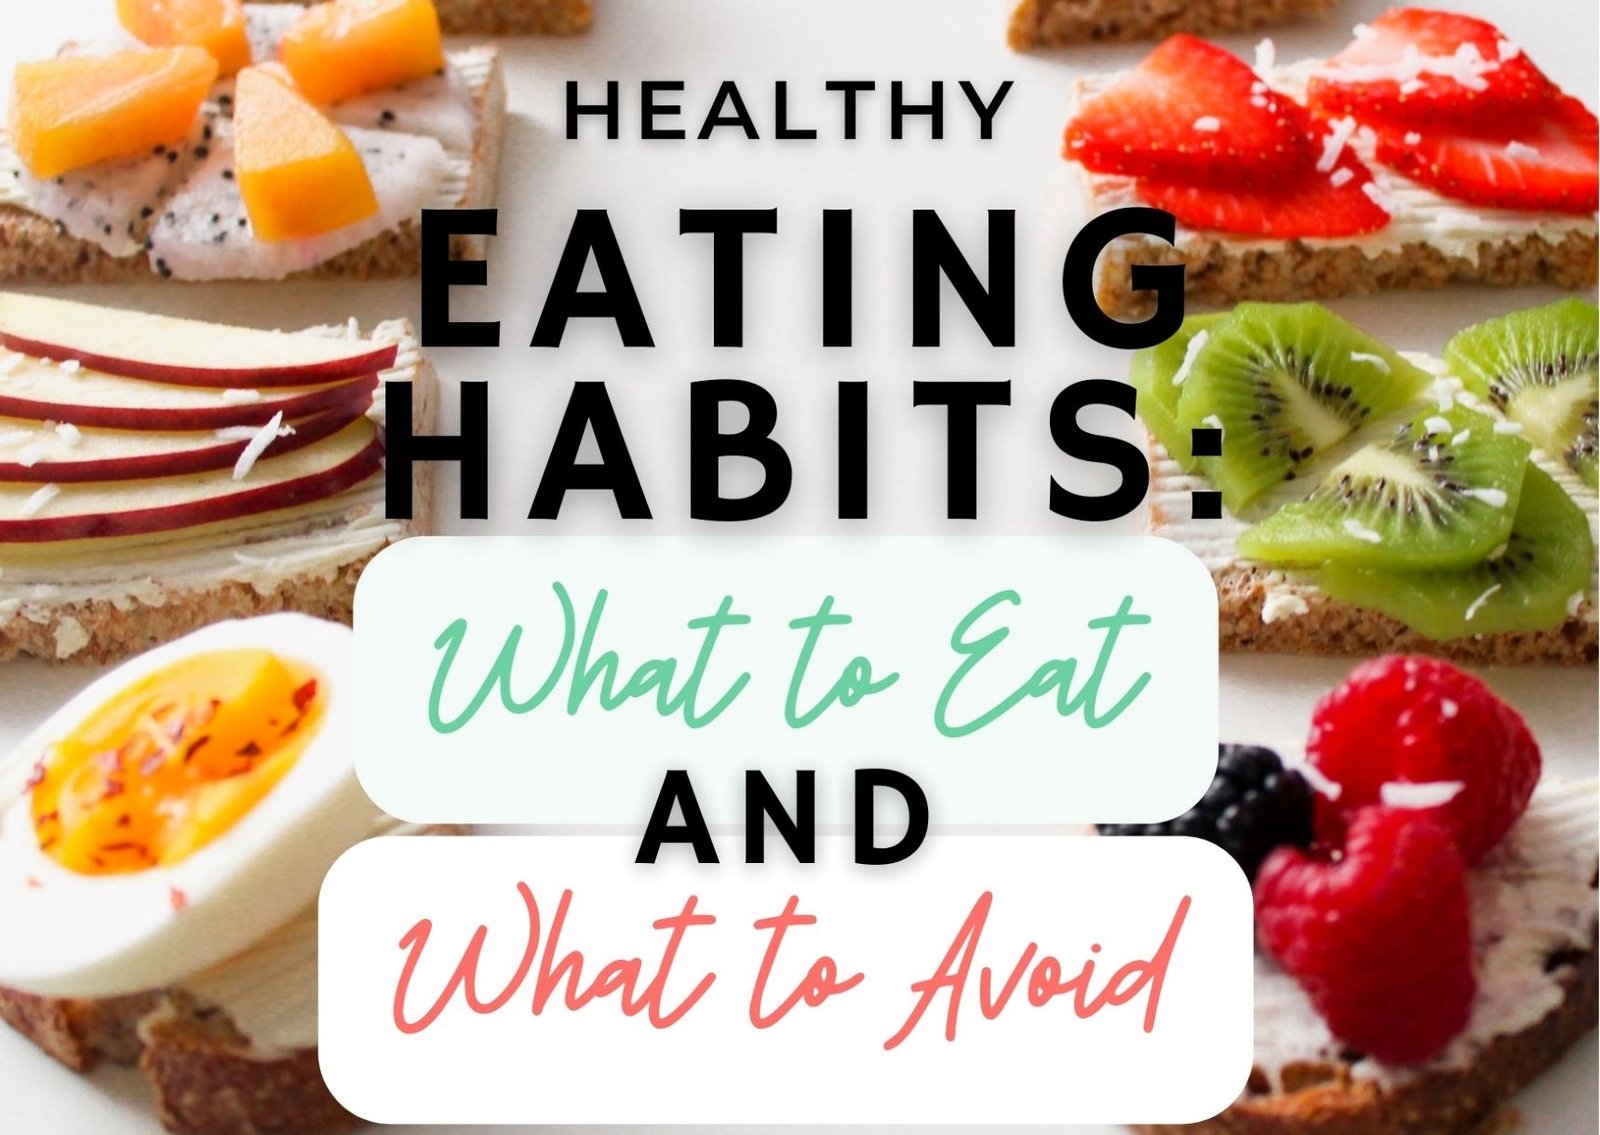 Healthy Eating Habits: What to Eat and What to Avoid